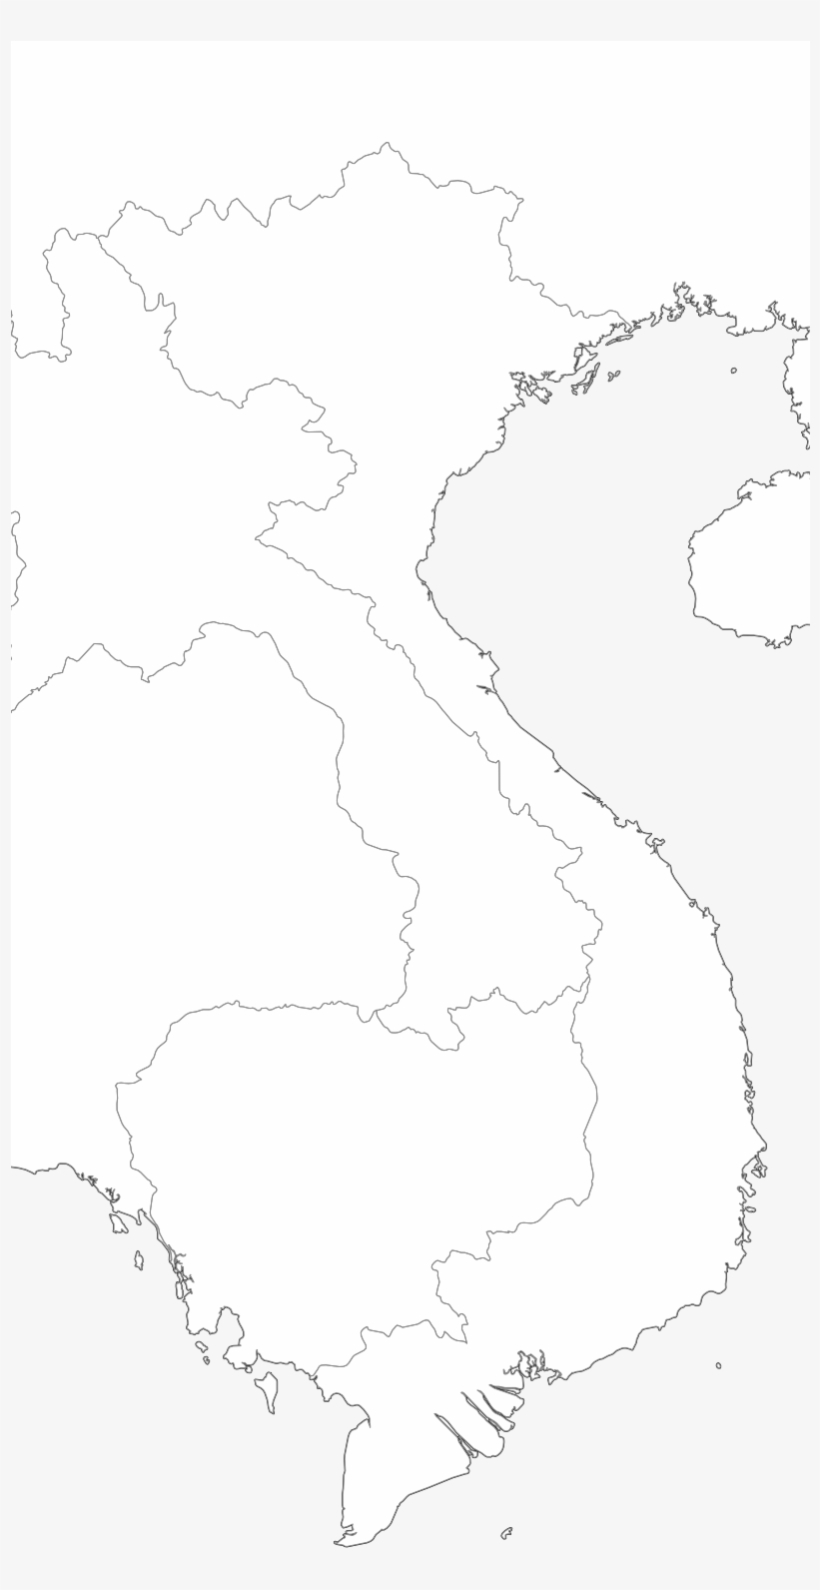 Large Vietnam Blank Map With Borders And Coasts Outlines - 3 Wochen Thailand, transparent png #3985444